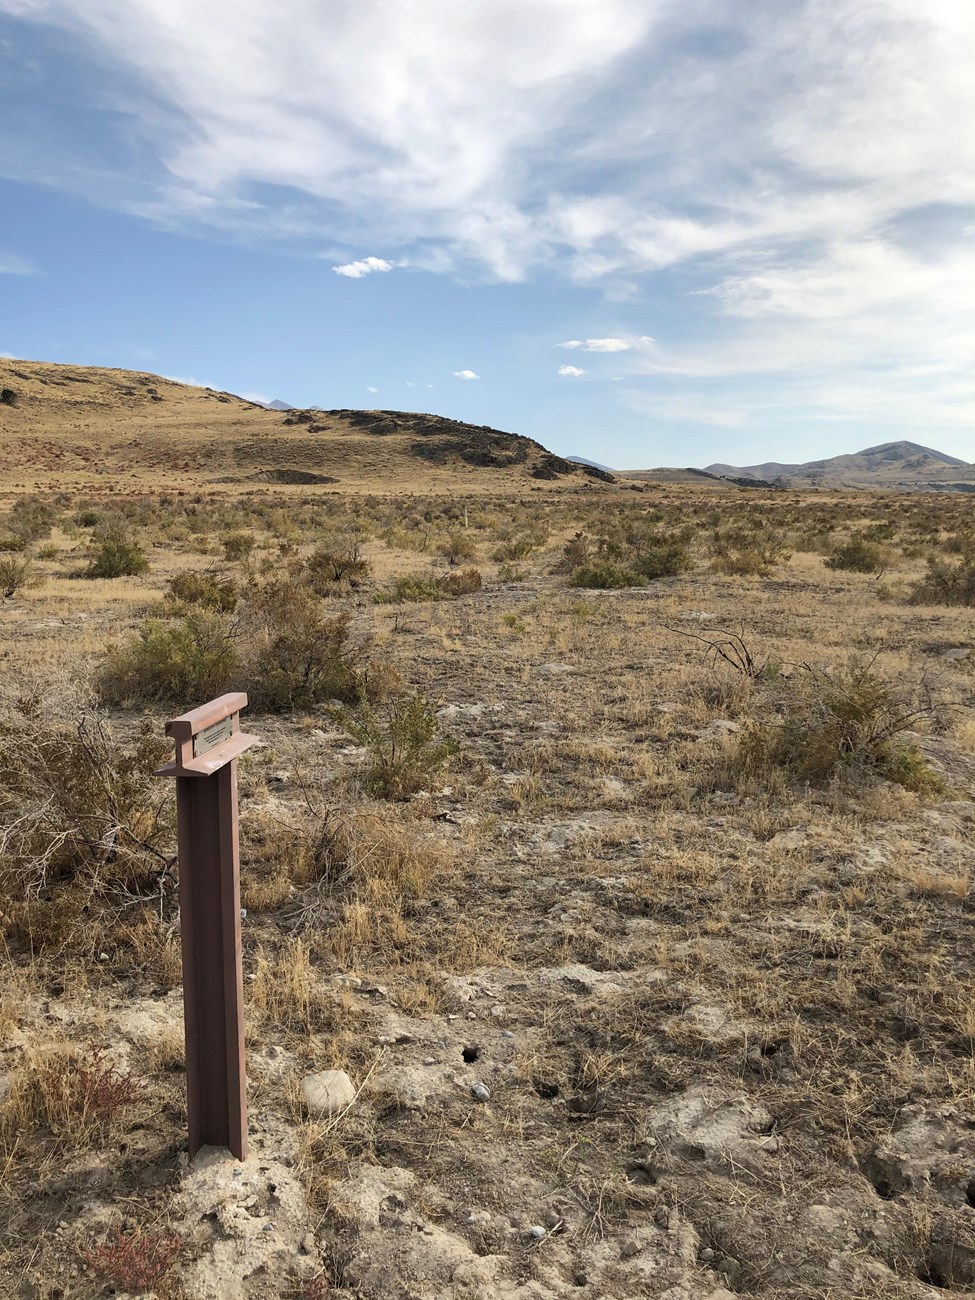 An iron trail marker stands next to a desert area with trail traces.